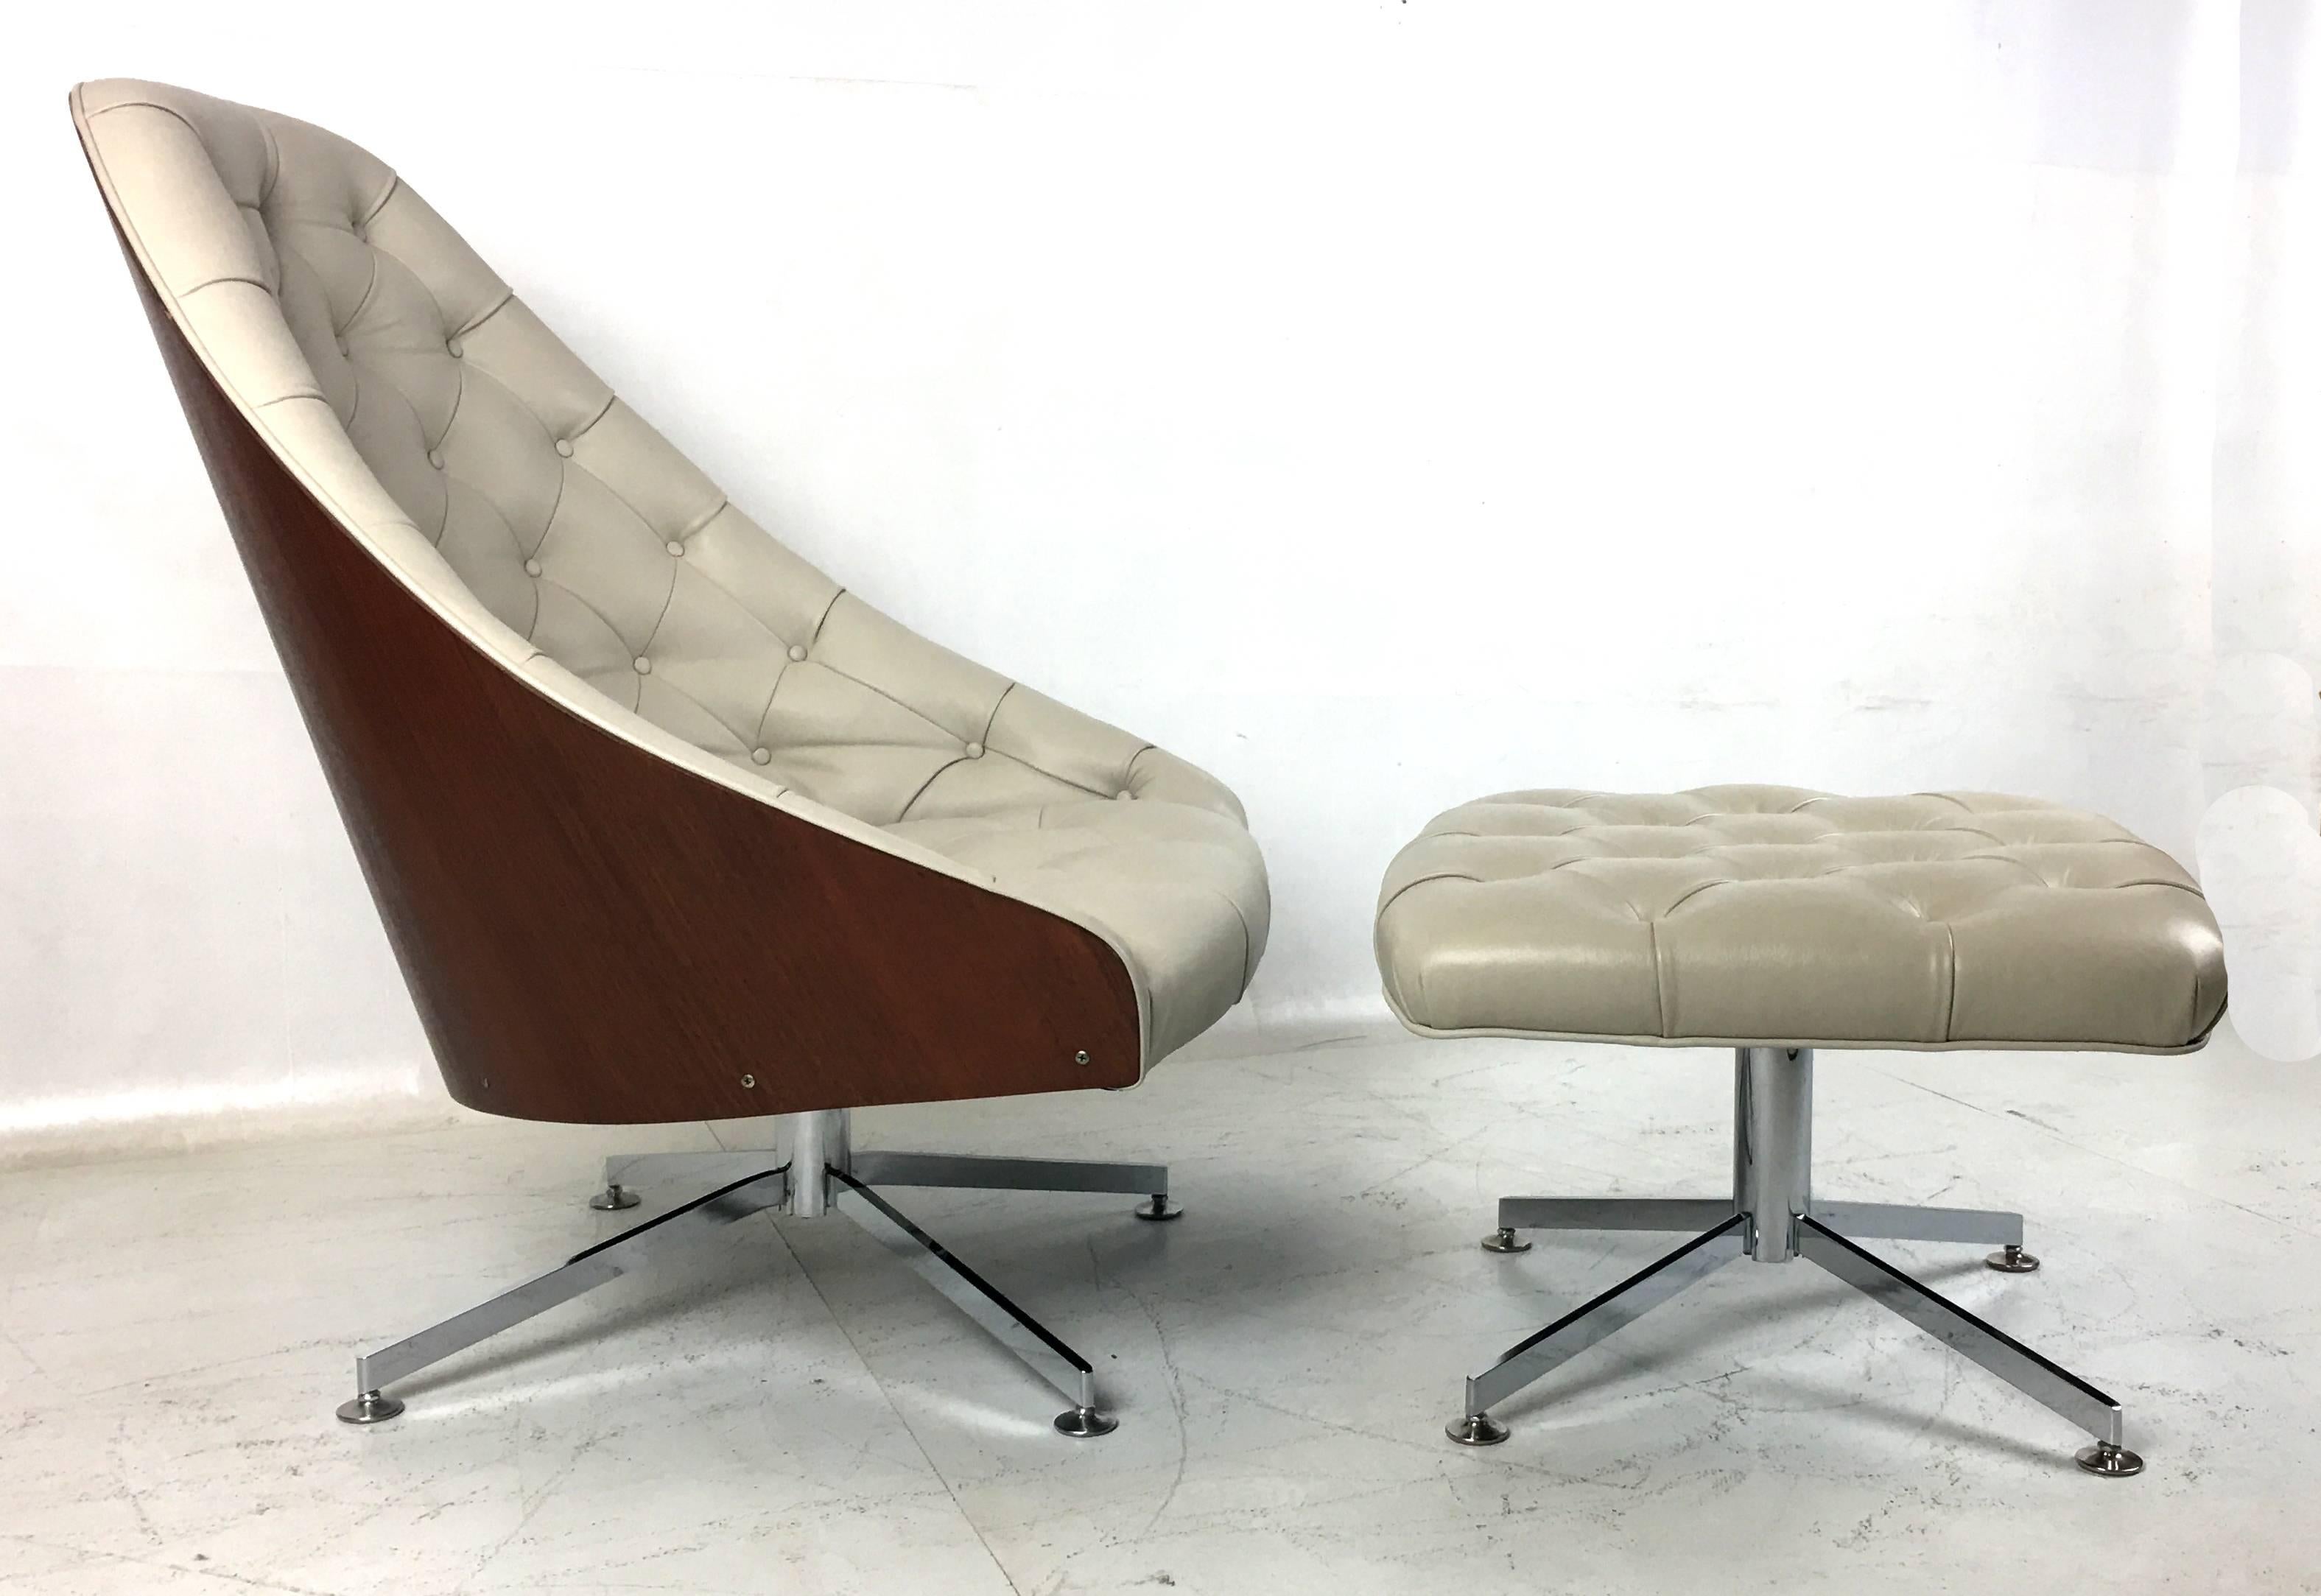 This is undoubtedly the coolest and rarest chair ever produced by Milo Baughman for Thayer Coggin. We have only seen one other of these chairs in all our years in the Design Trade. There was no expense spared in the restoration of this fabulous and